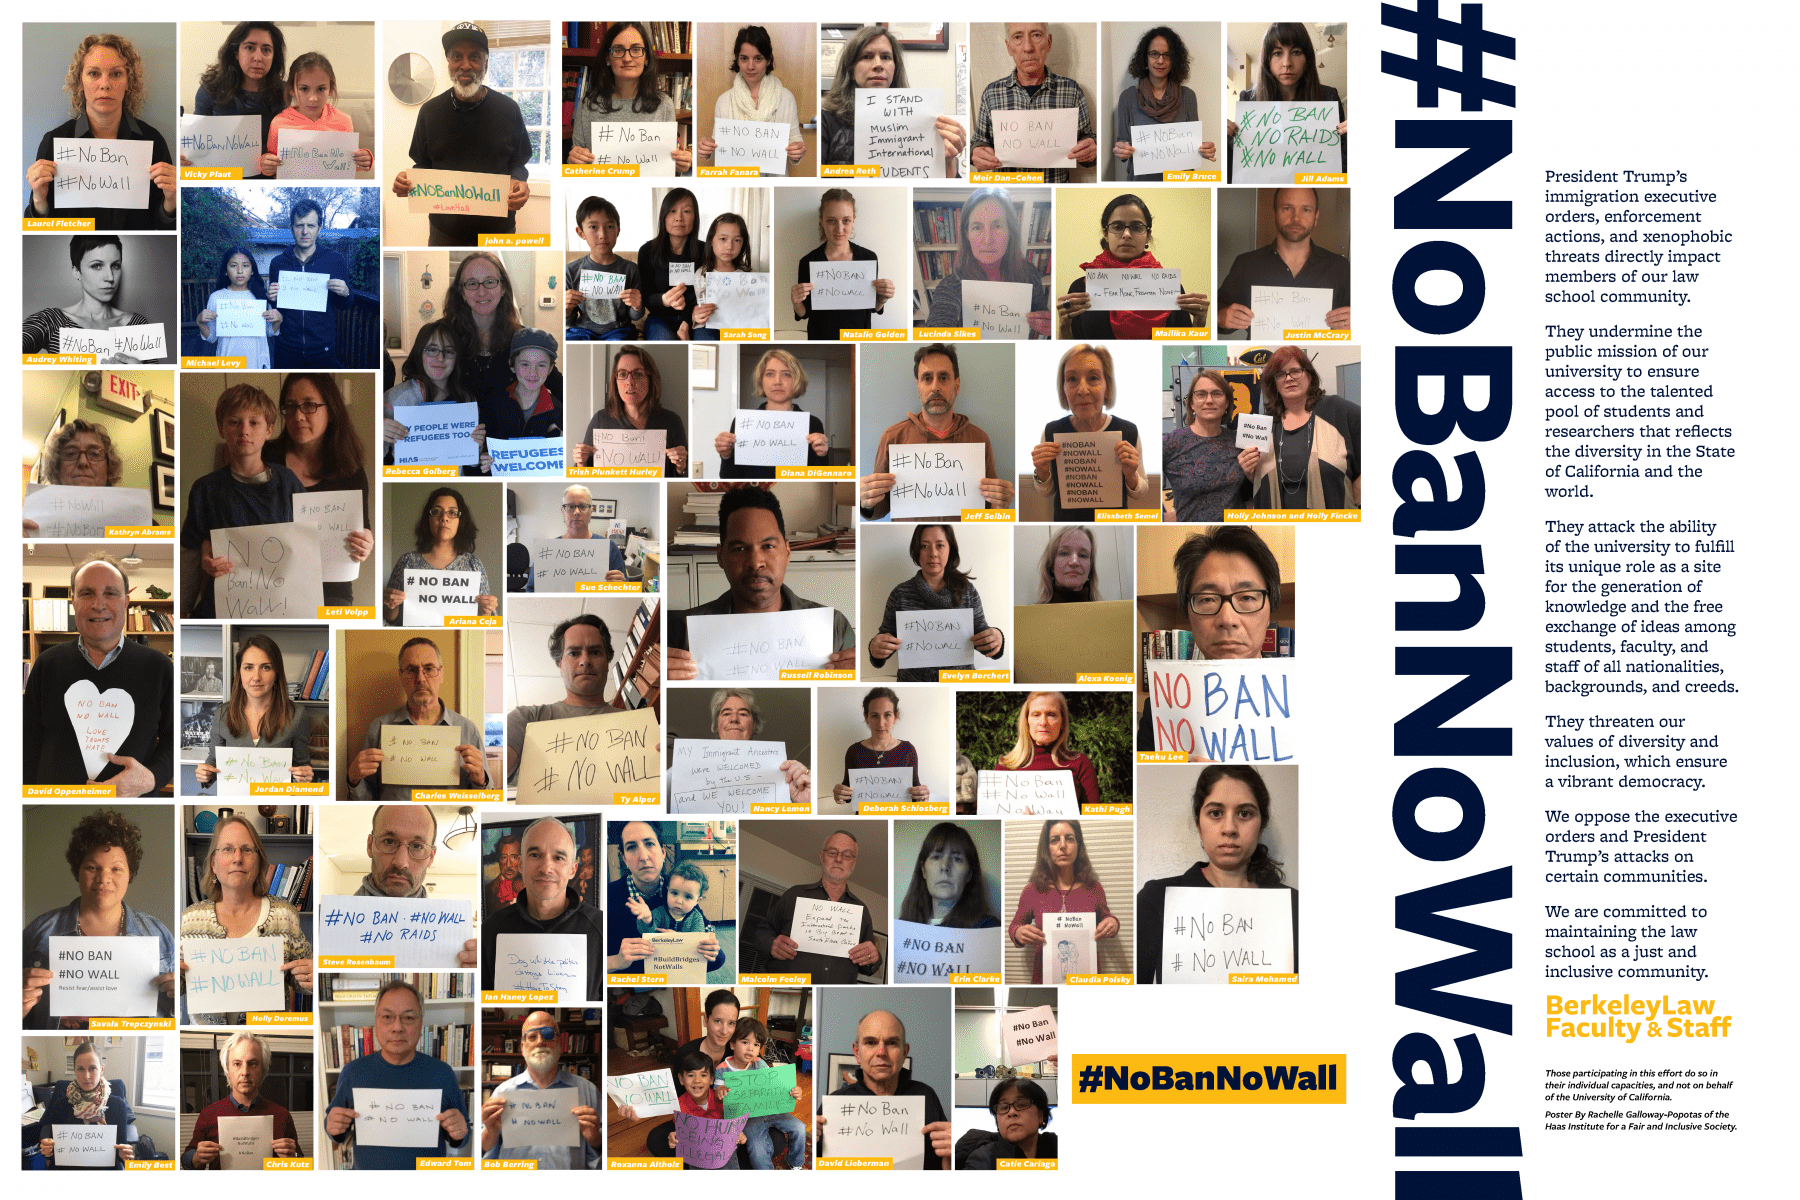 View article Berkeley Law Faculty & Staff #NoBanNoWall Statement and Poster of Support